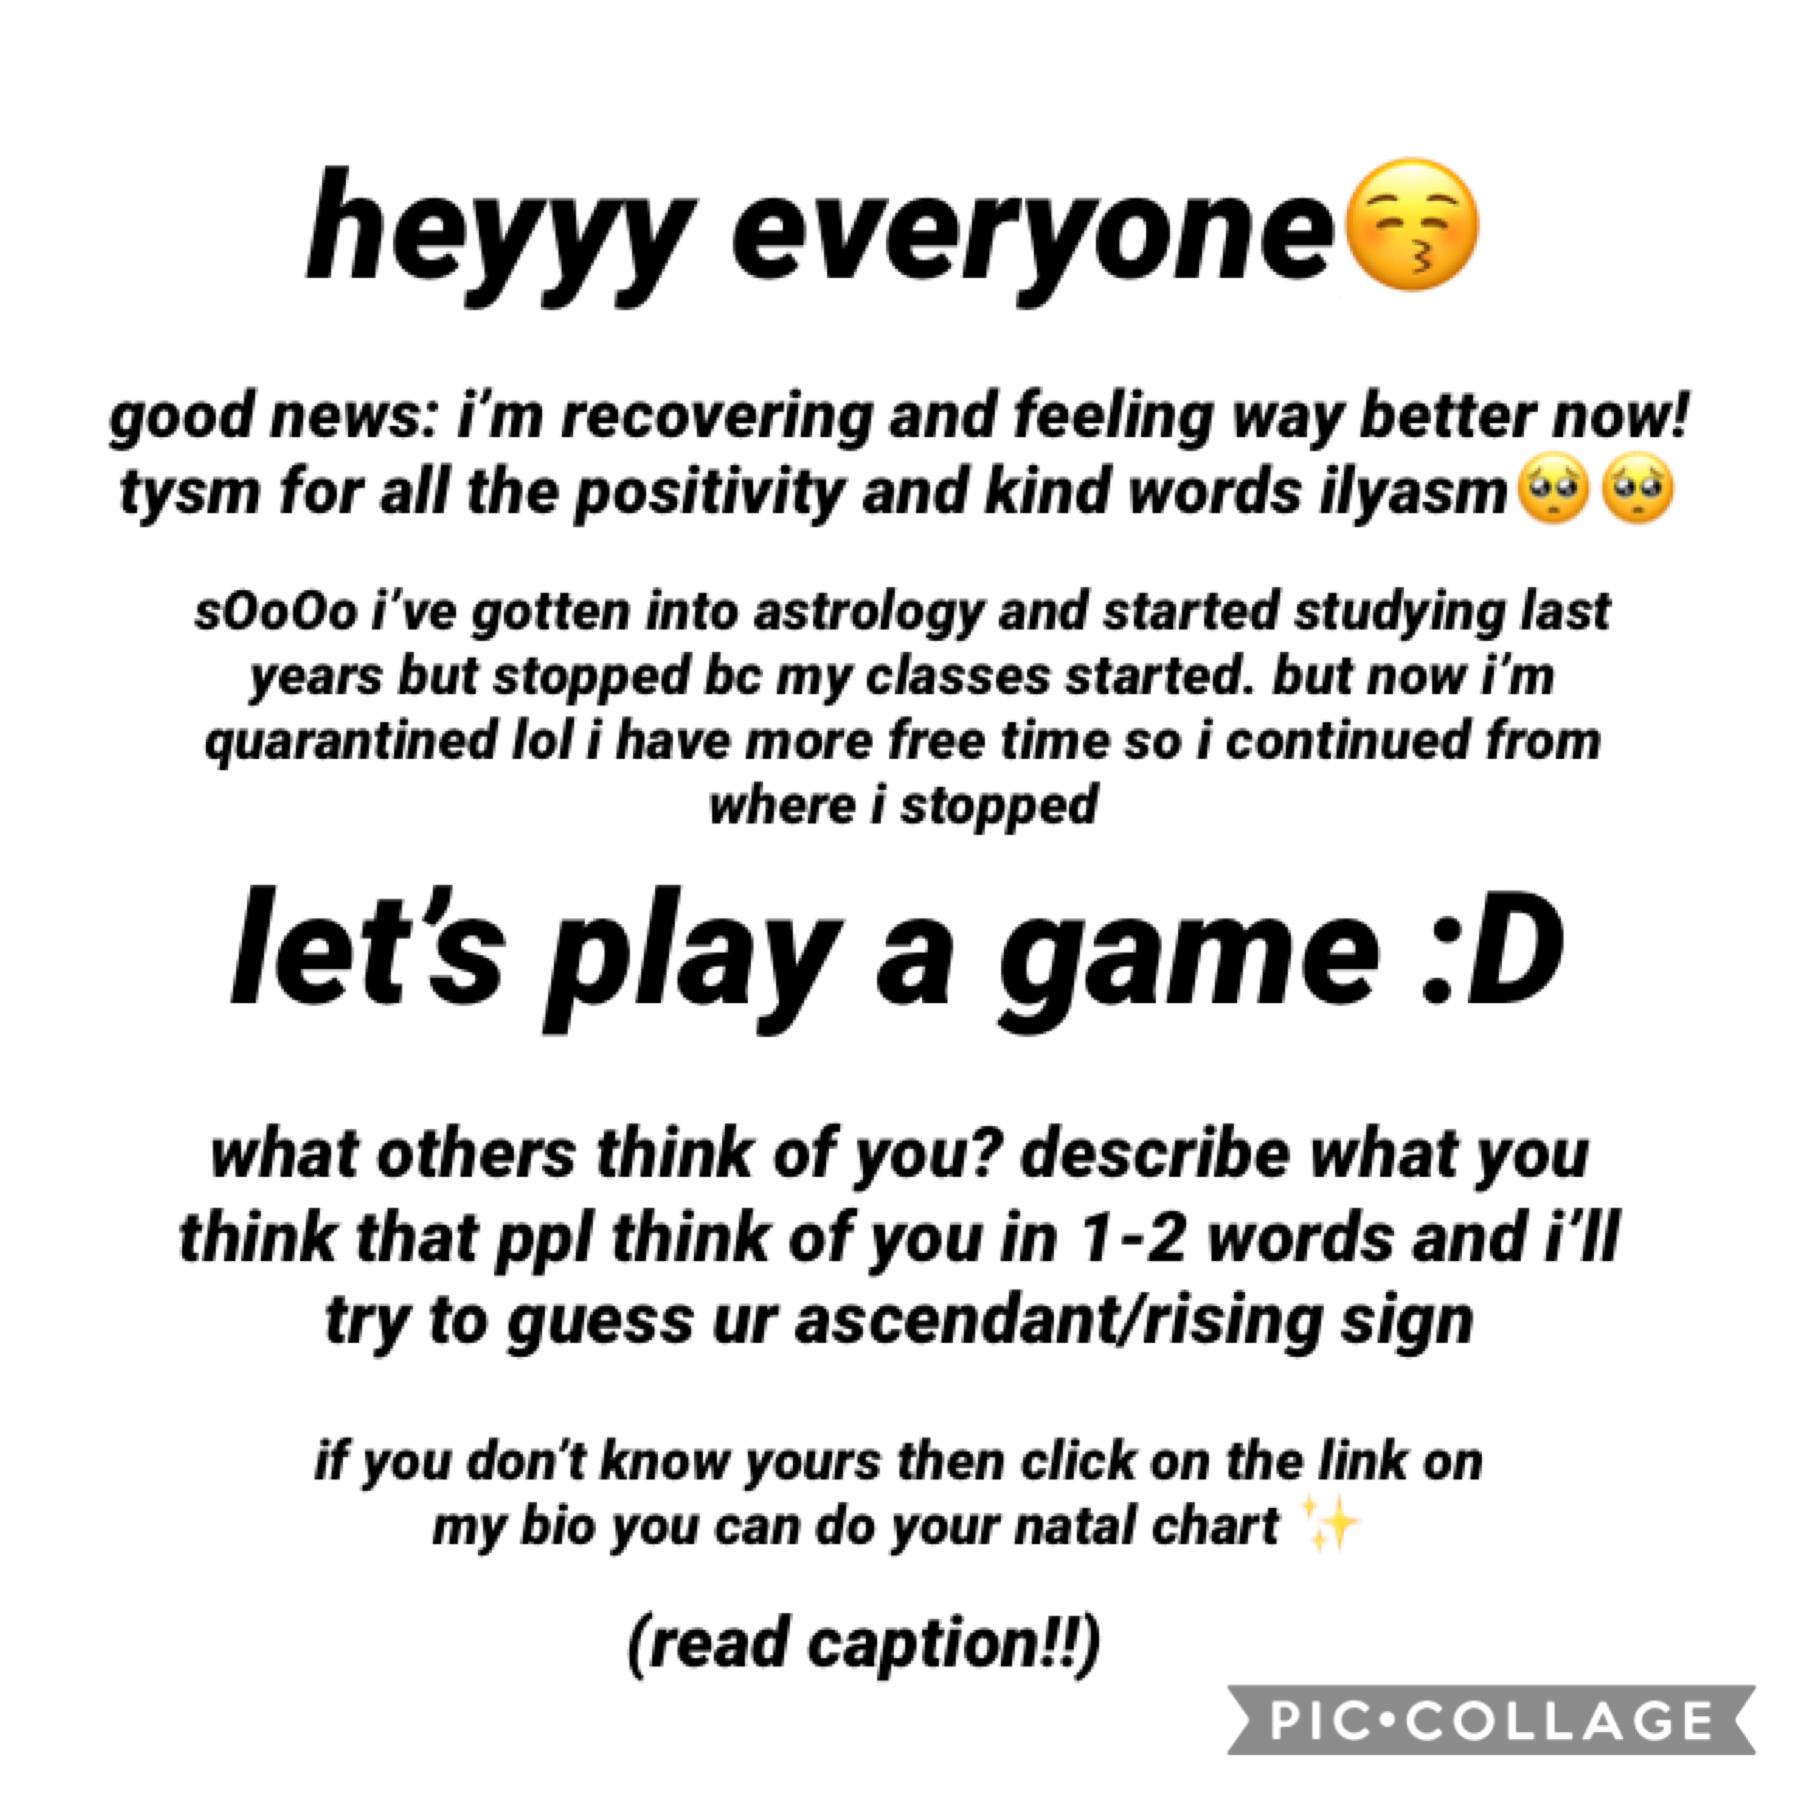 tap here~

ok i think i can do this lol

don’t expect me to get it right at the first attempt i’m a beginner 😂 i might get your sun/moon/venus right tho

gonna do this til i get tired or bored :))